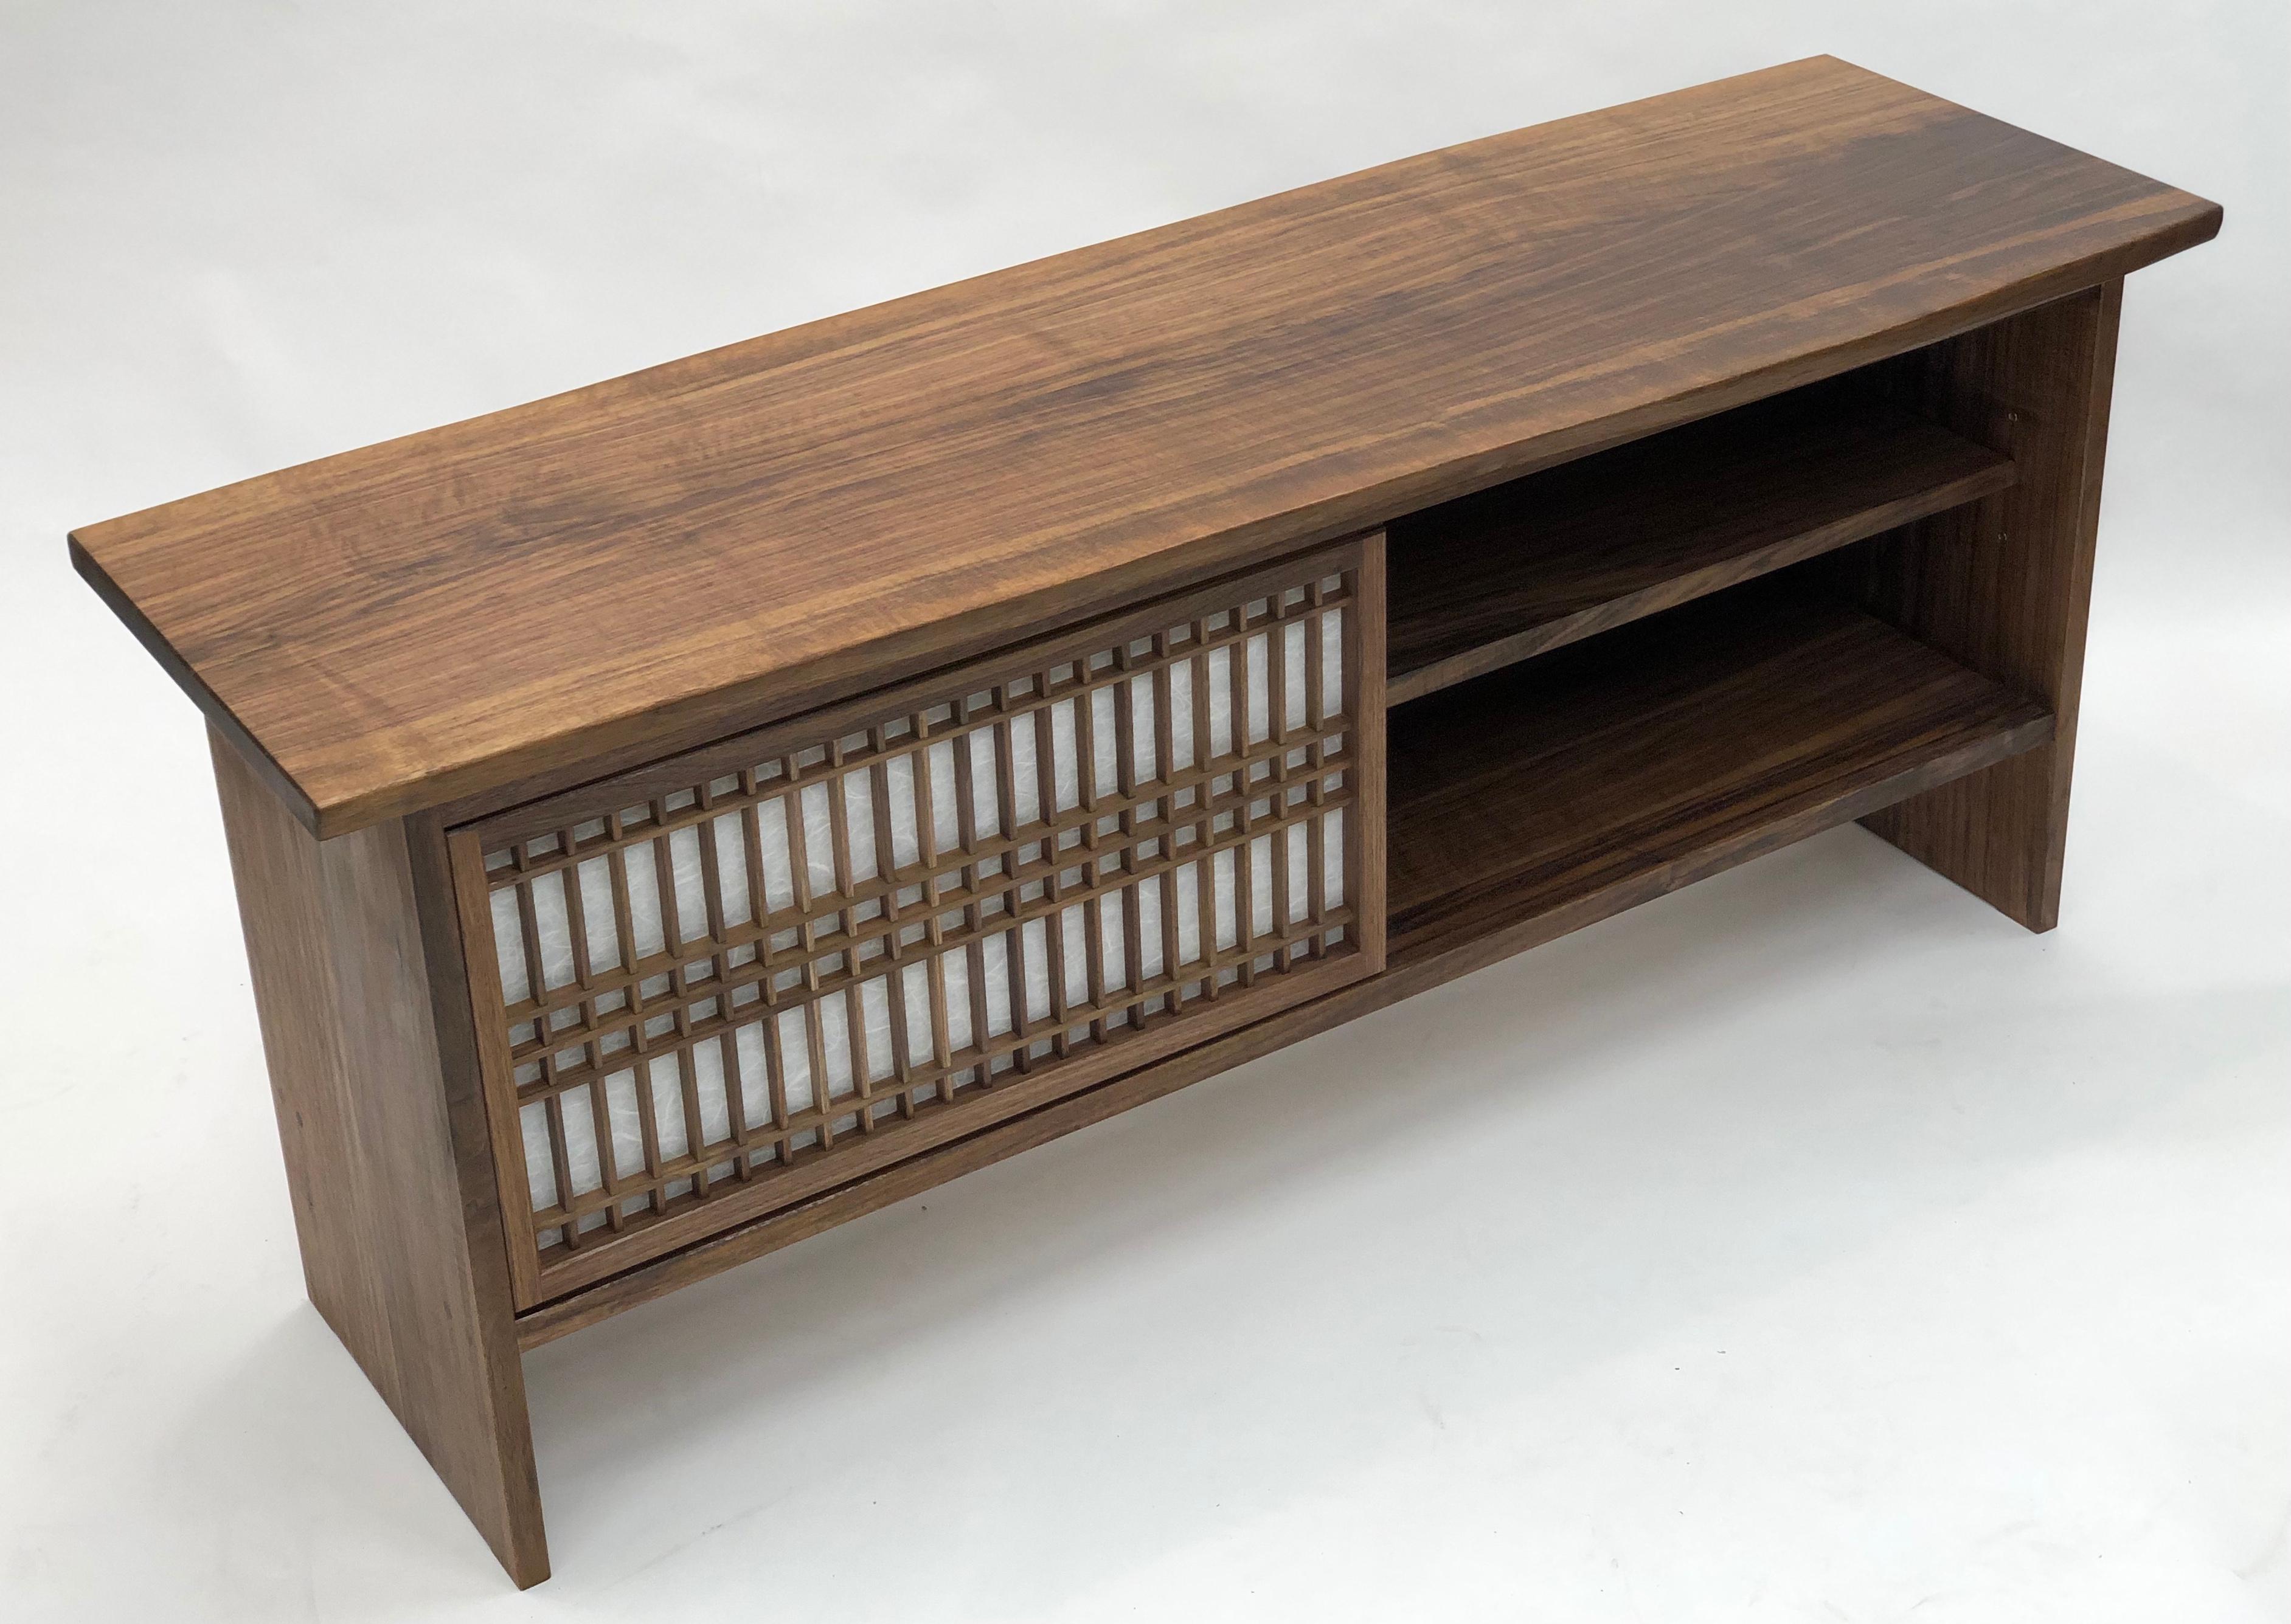 Walnut credenza made by hand and featuring sliding shoji doors and a shelf. This cabinet is constructed utilizing time honored joinery techniques featured in Japanese temple carpentry in addition it features shoji made utilizing those same